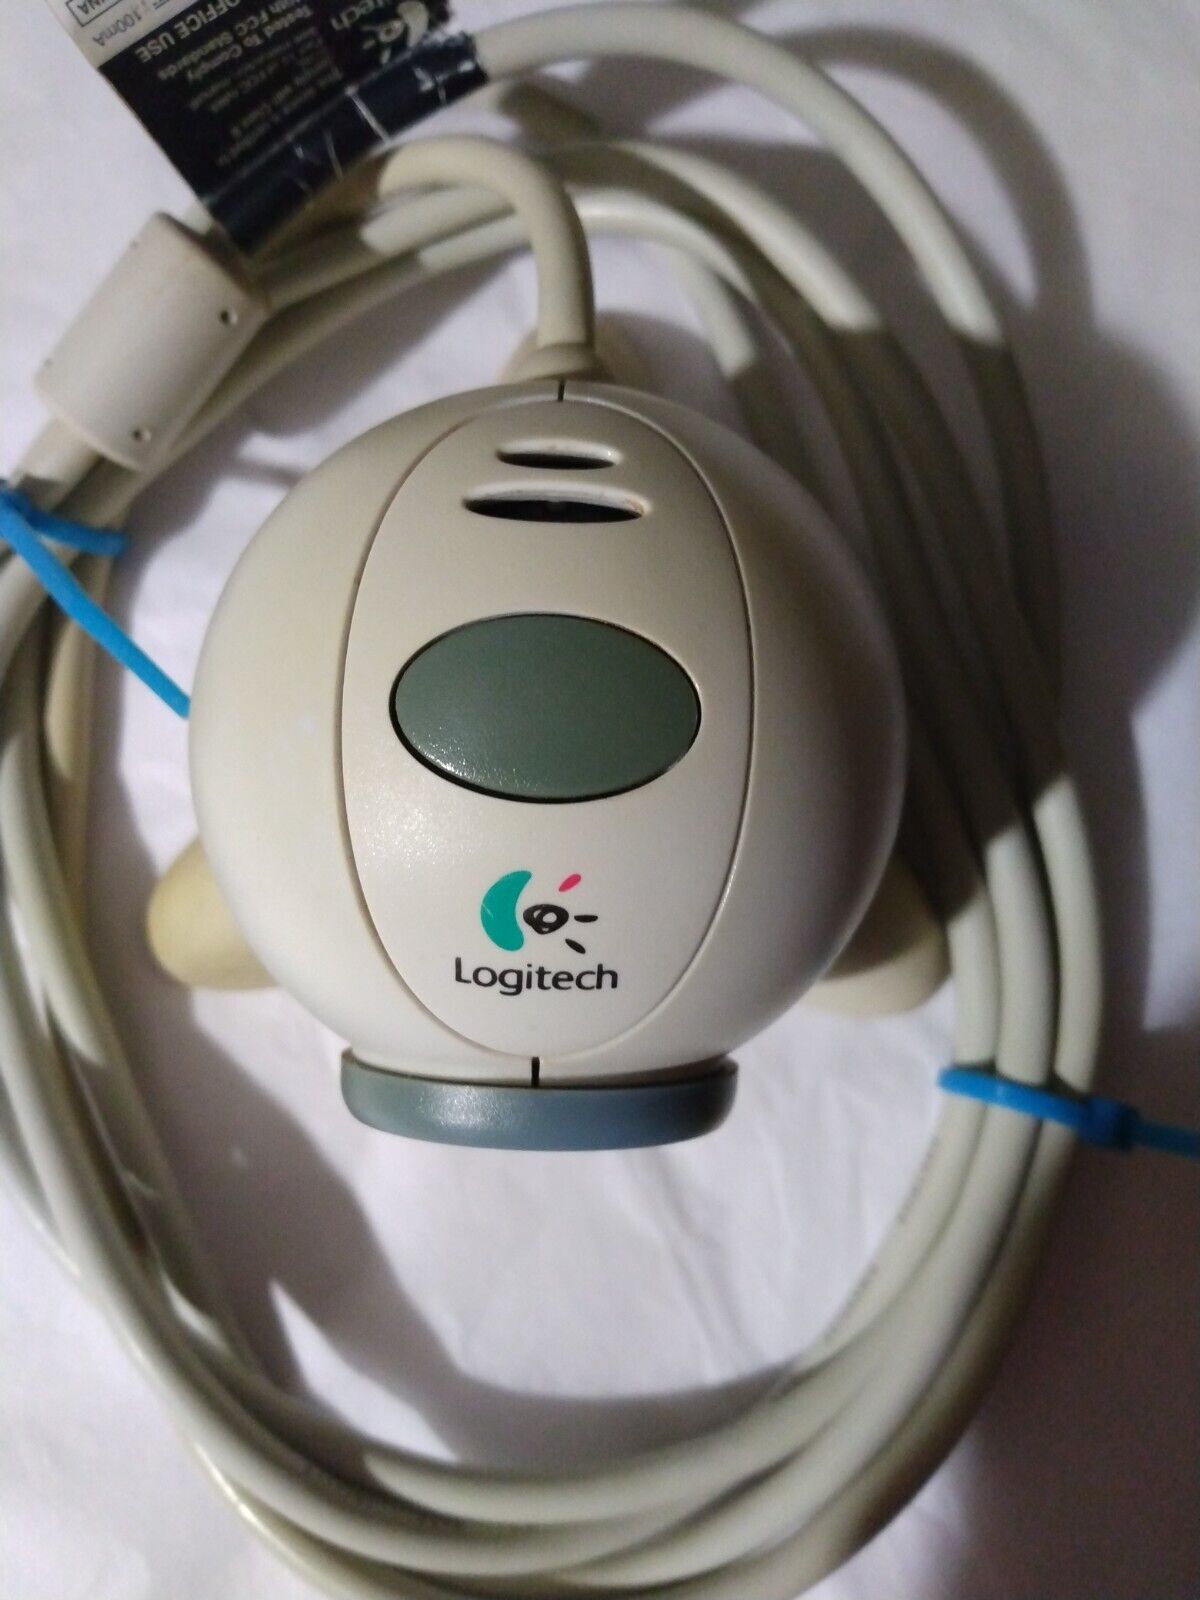 [TESTED] Logitech Quickcam Express PC Webcam Vintage w/ Driver [Free Shipping]